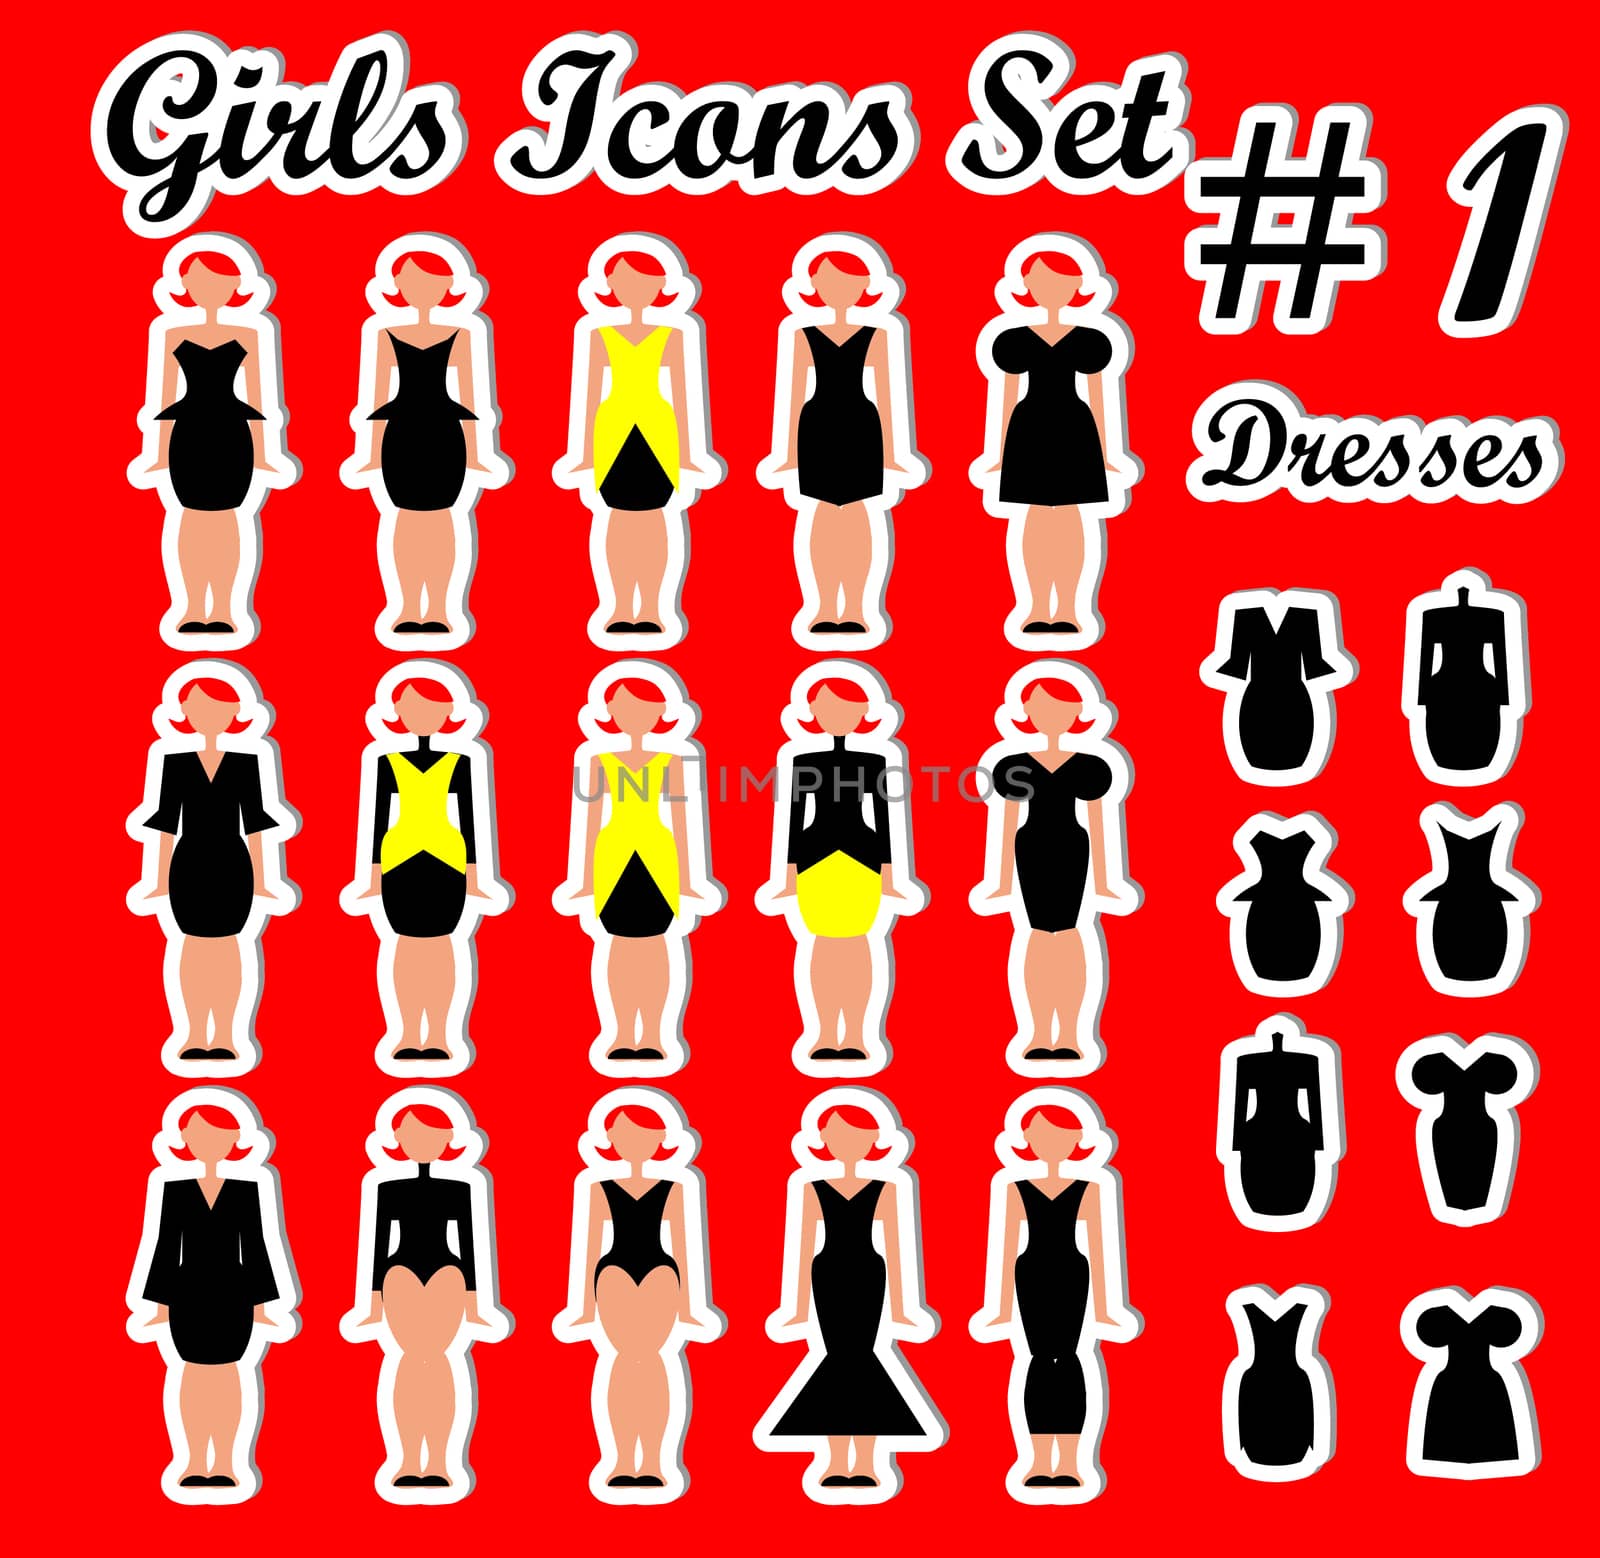 Girls Woman Icons Set 1 dress and people